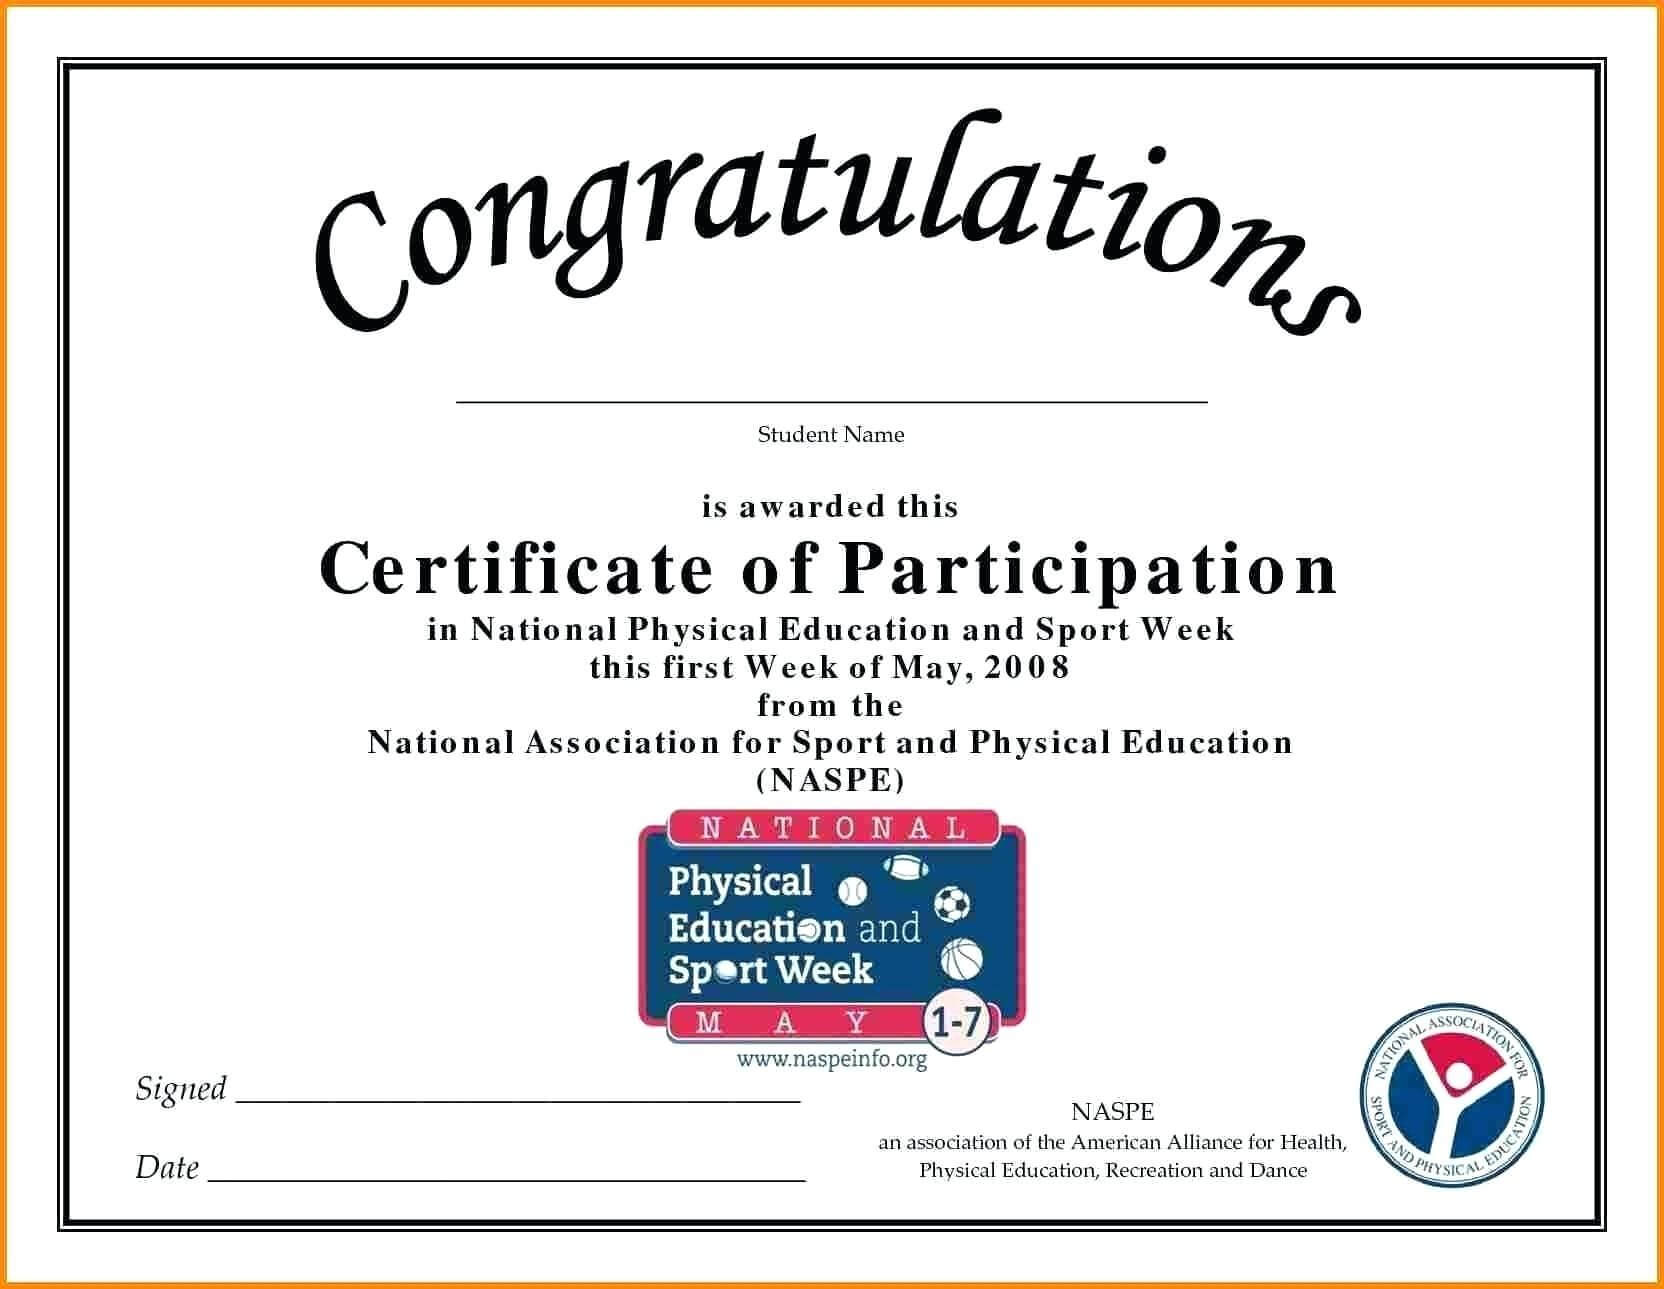 🥰free Printable Certificate Of Participation Templates (Cop)🥰 Regarding Certification Of Participation Free Template